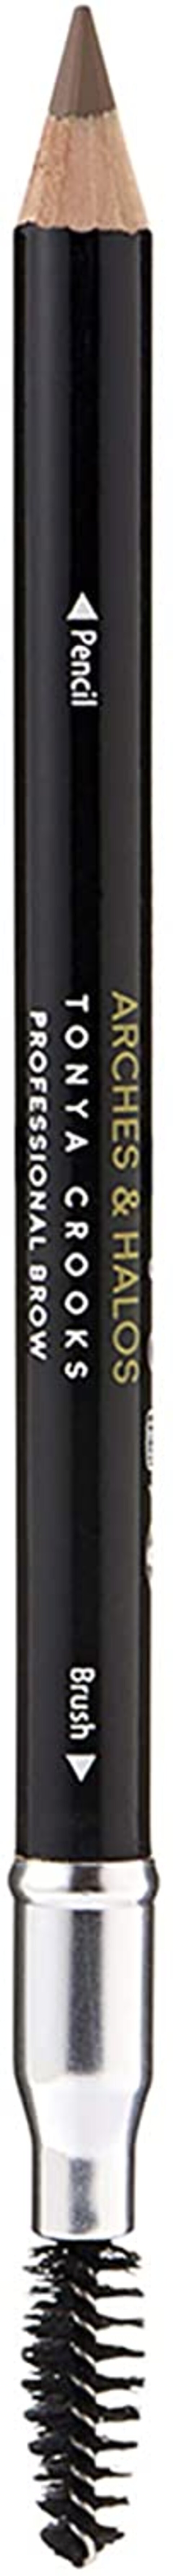 Arches &amp; Halos Precision Brow Shaping Pencil In Sunny Blonde, 0.2 Oz